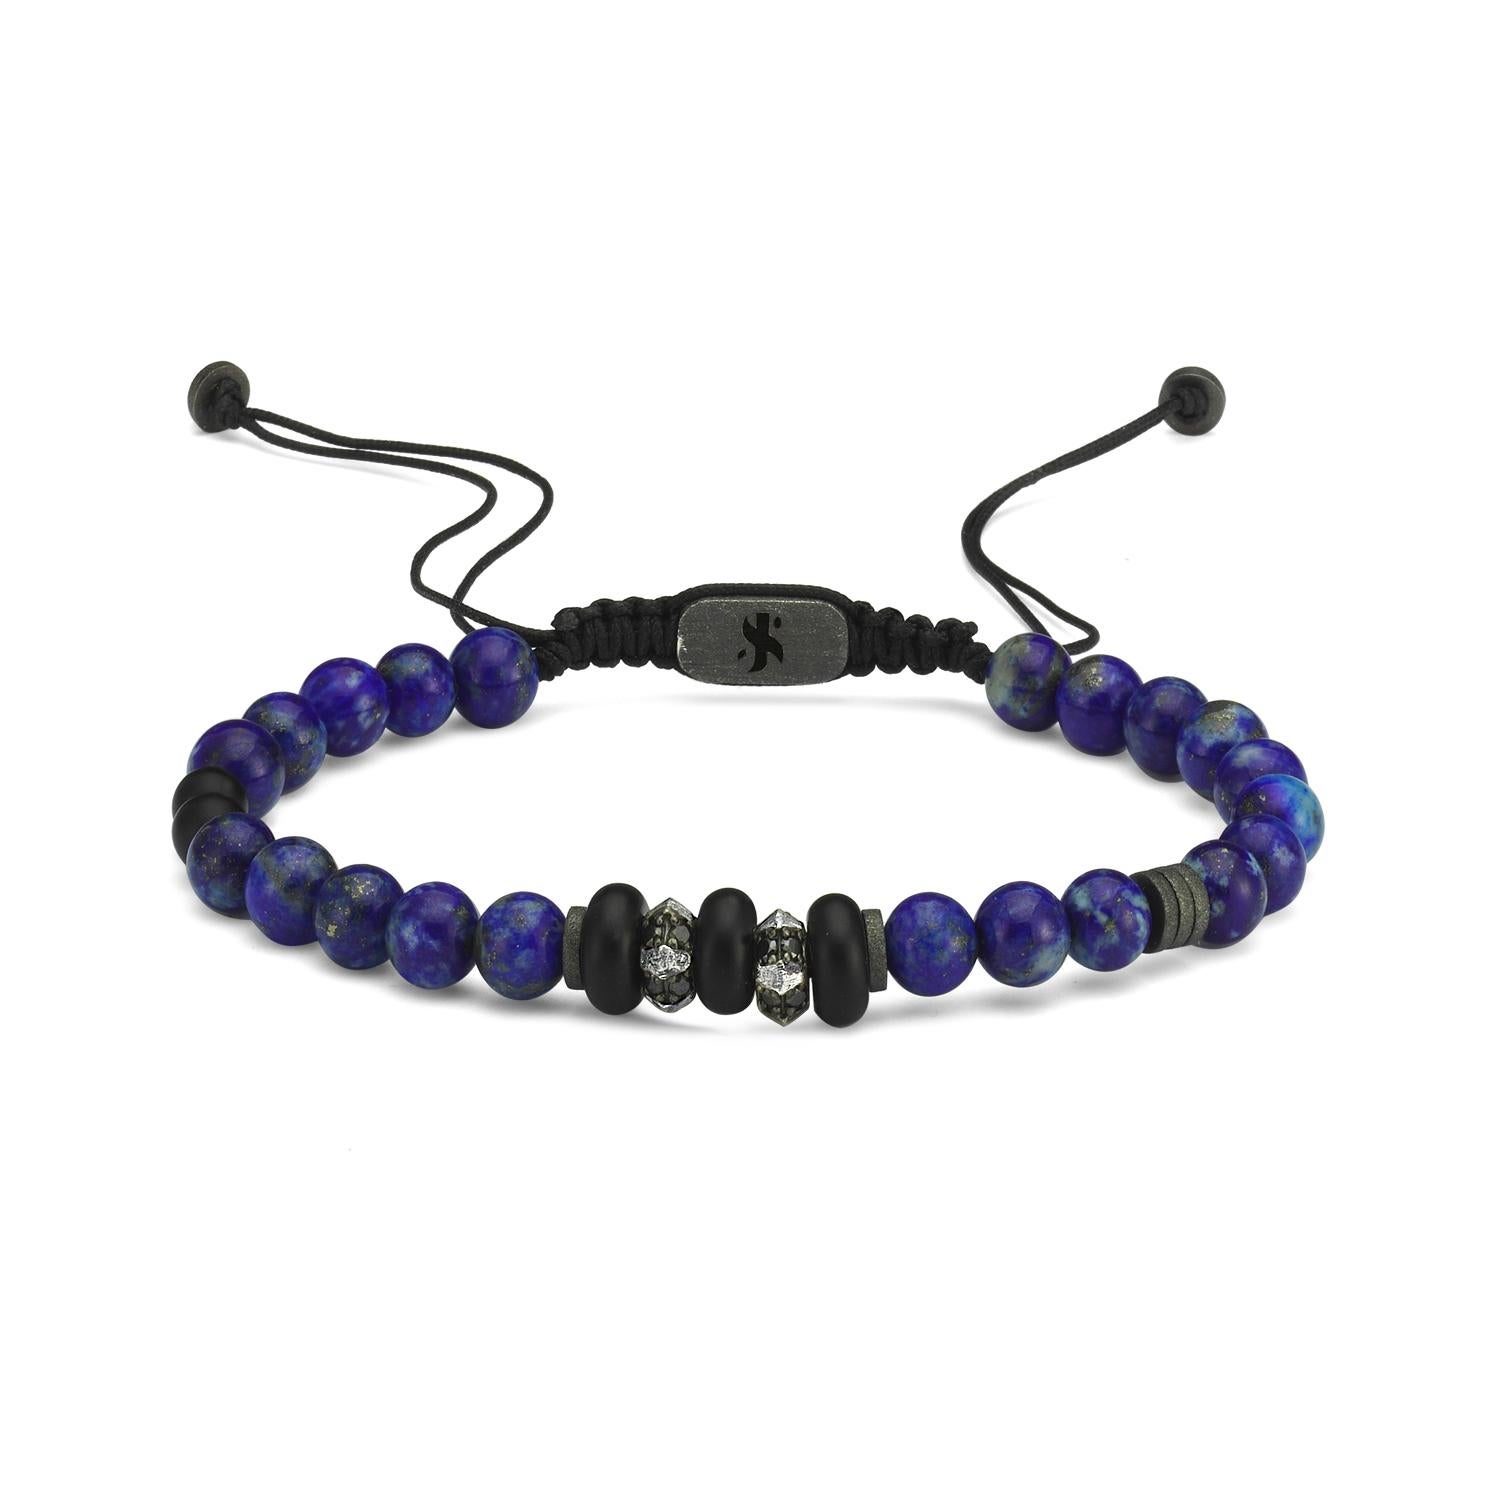 Bian bracelet in lapis & matt onyx by Selda Jewellery

Additional Information:-
Collection: Men's Luxury Bracelets

The use of lapis & matt onyx stones is combined with sterling silver charms and Black diamonds to create a sporty and stylish